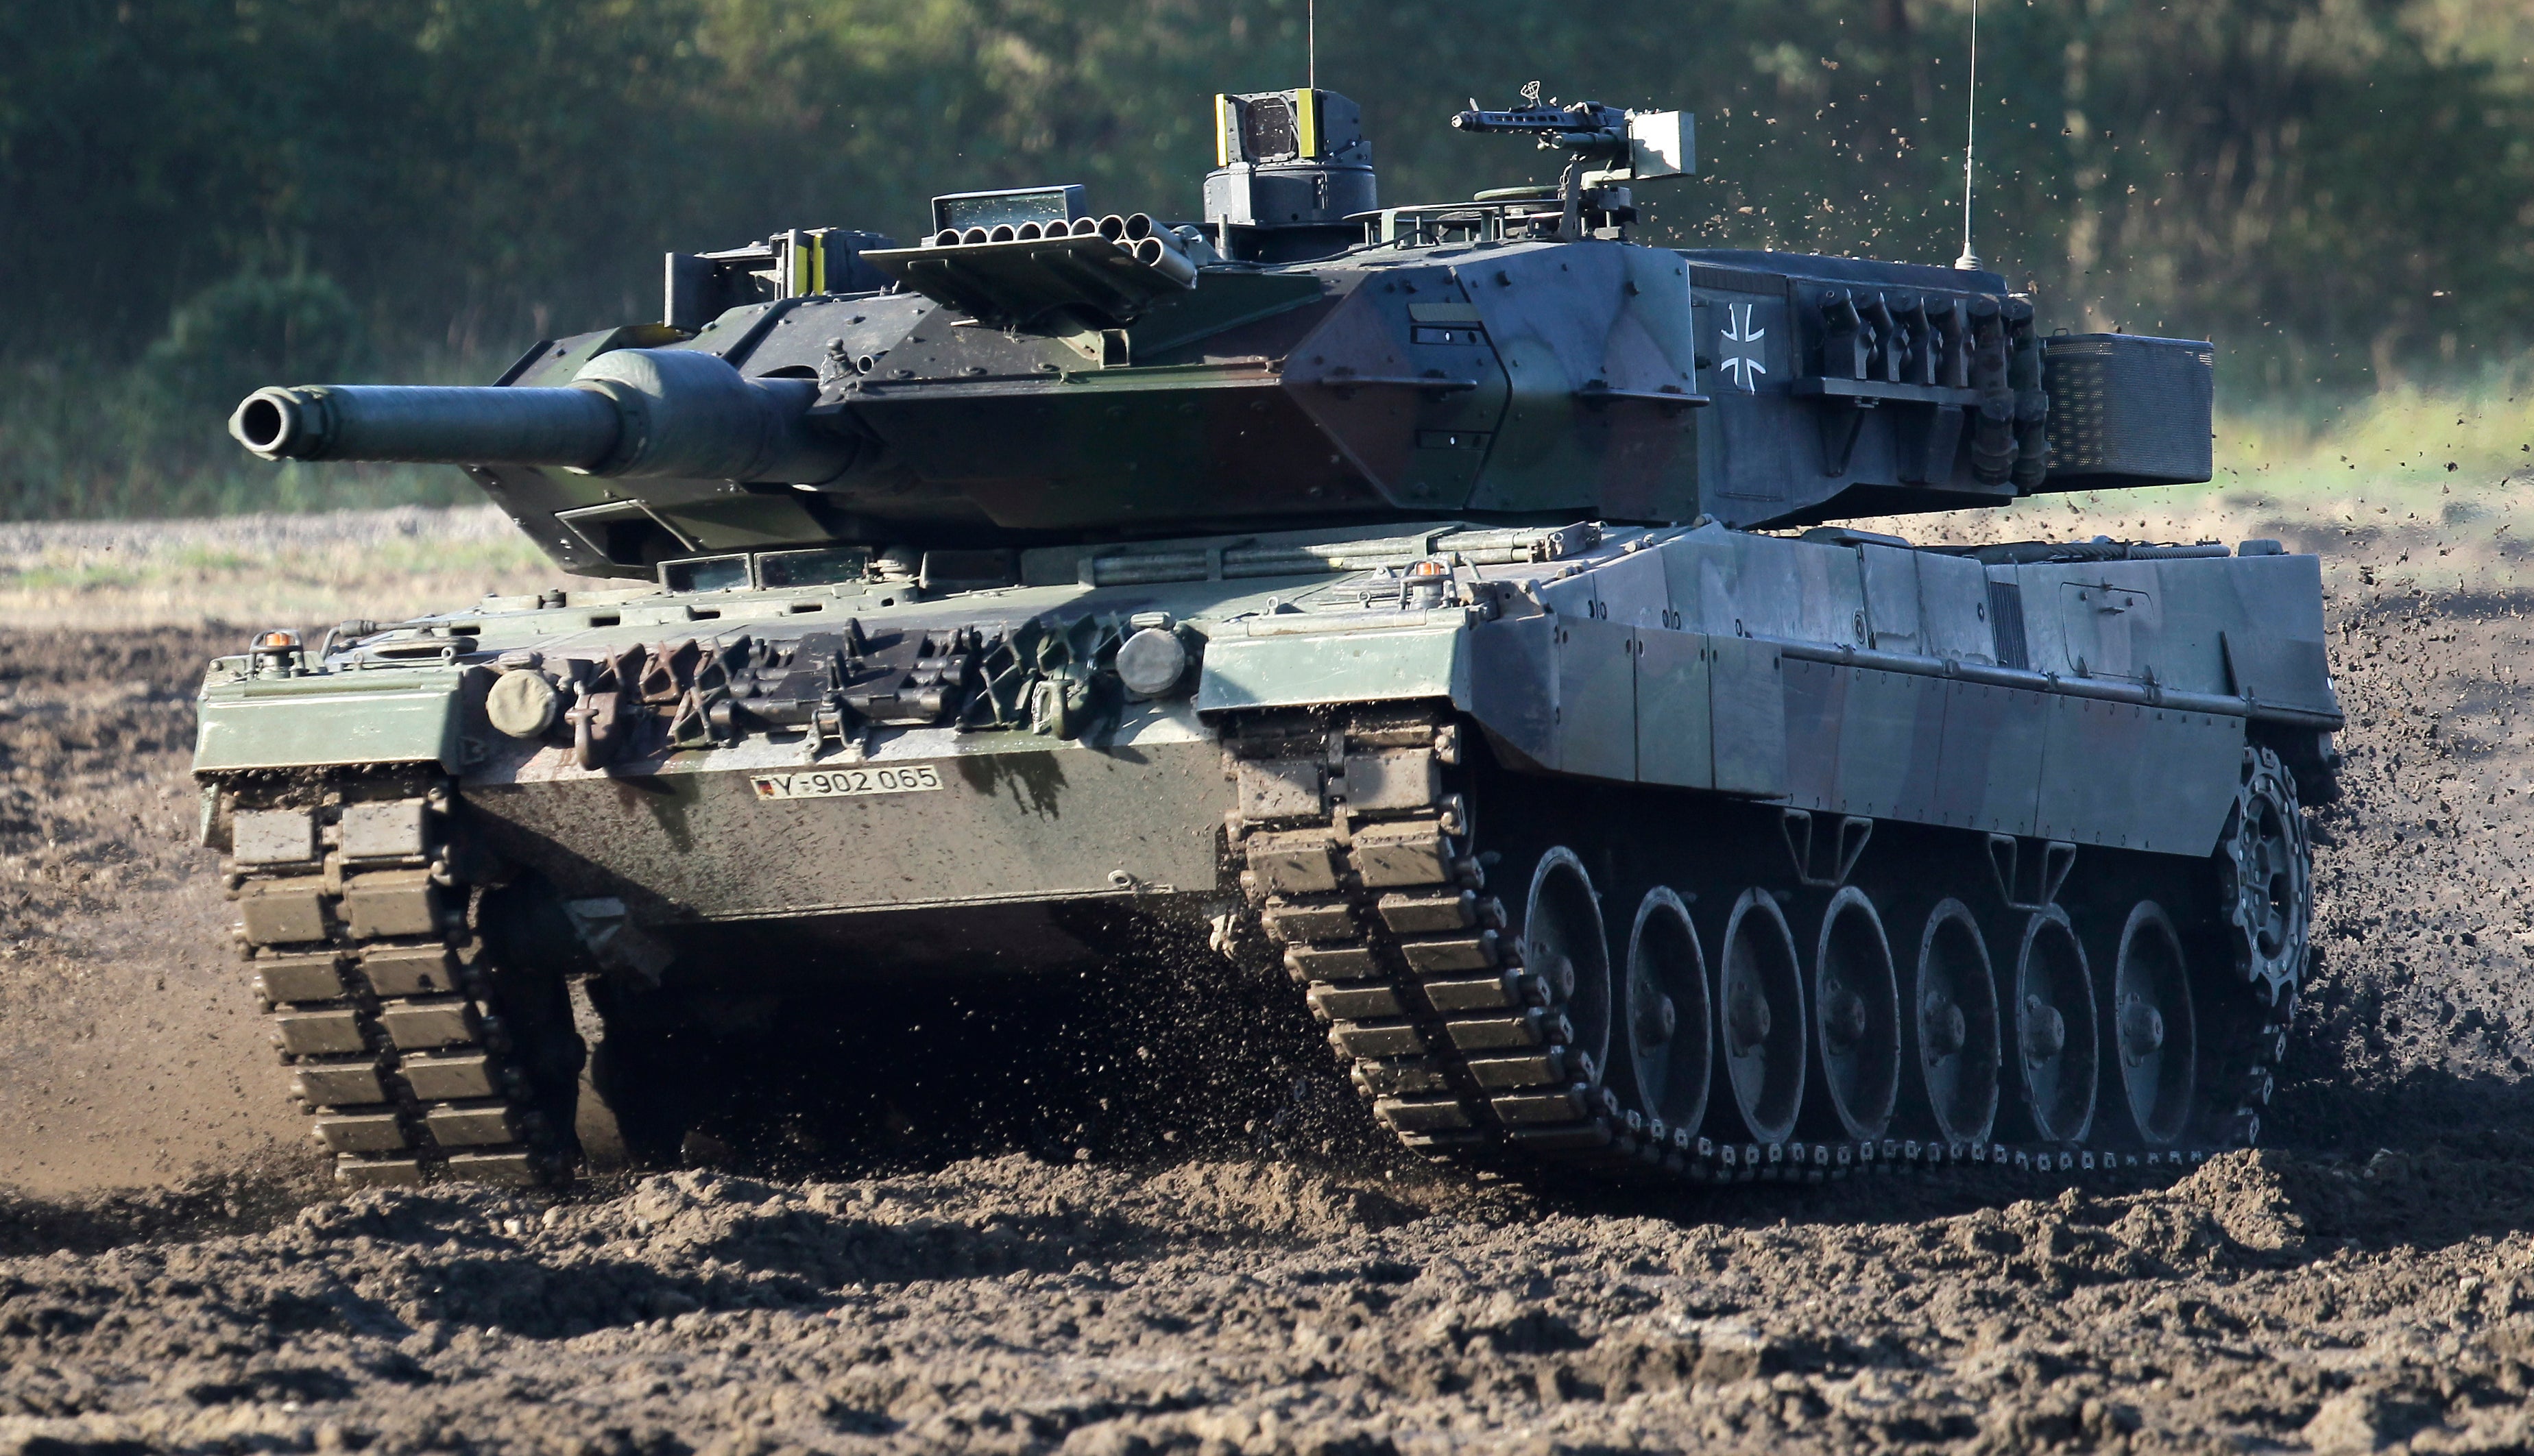 A Leopard 2 tank, which is part of the equipment Ukraine wants